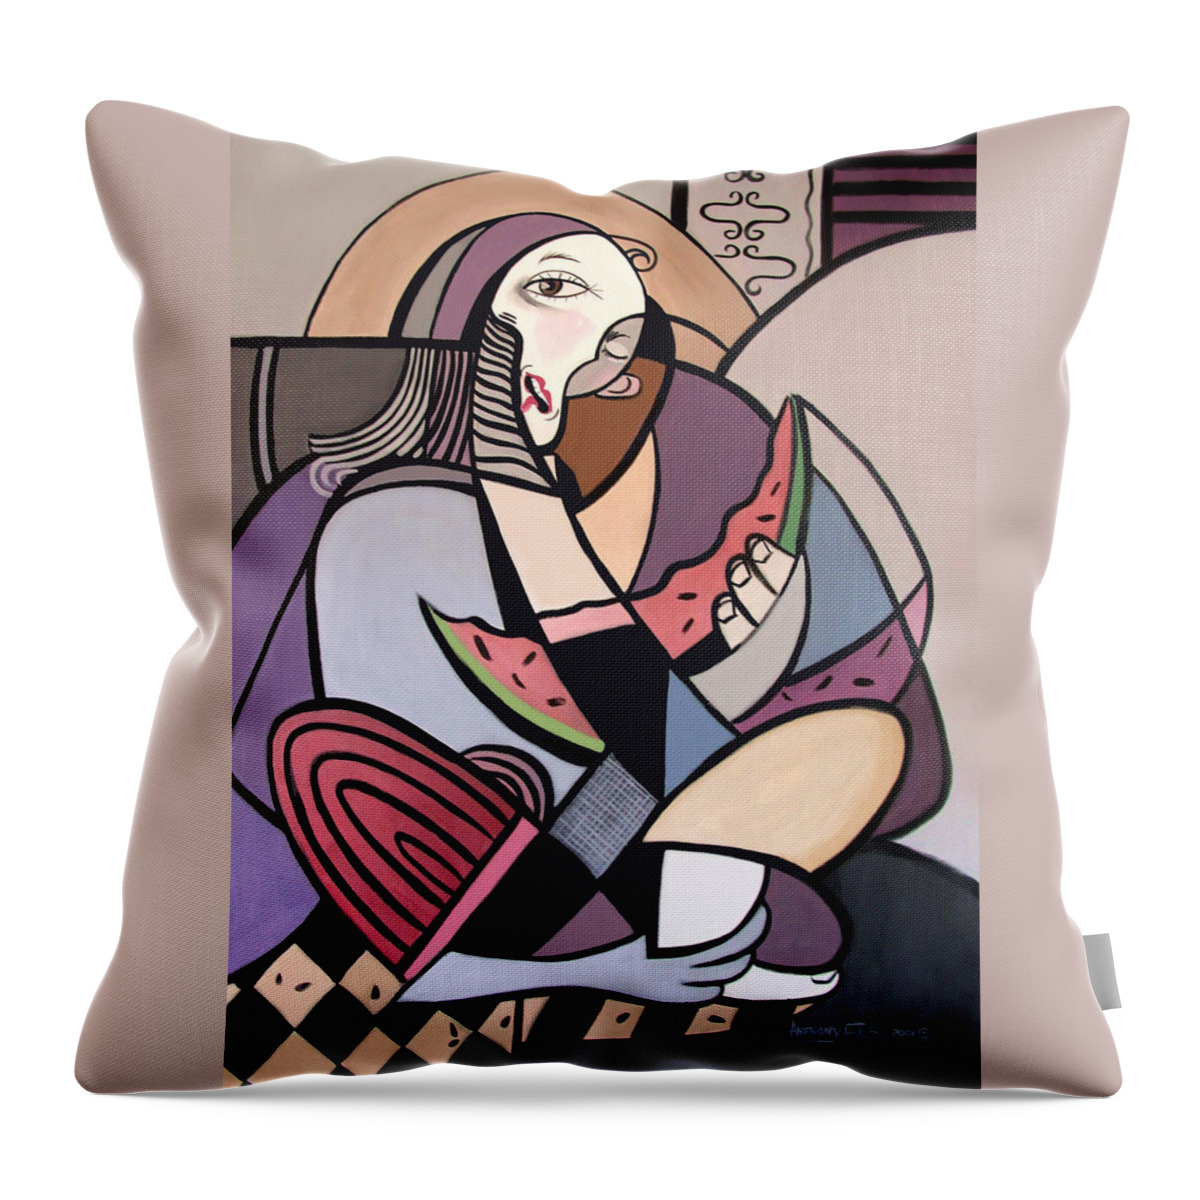 Woman Eating Watermelon Throw Pillow featuring the painting Woman Eating Watermelon by Anthony Falbo